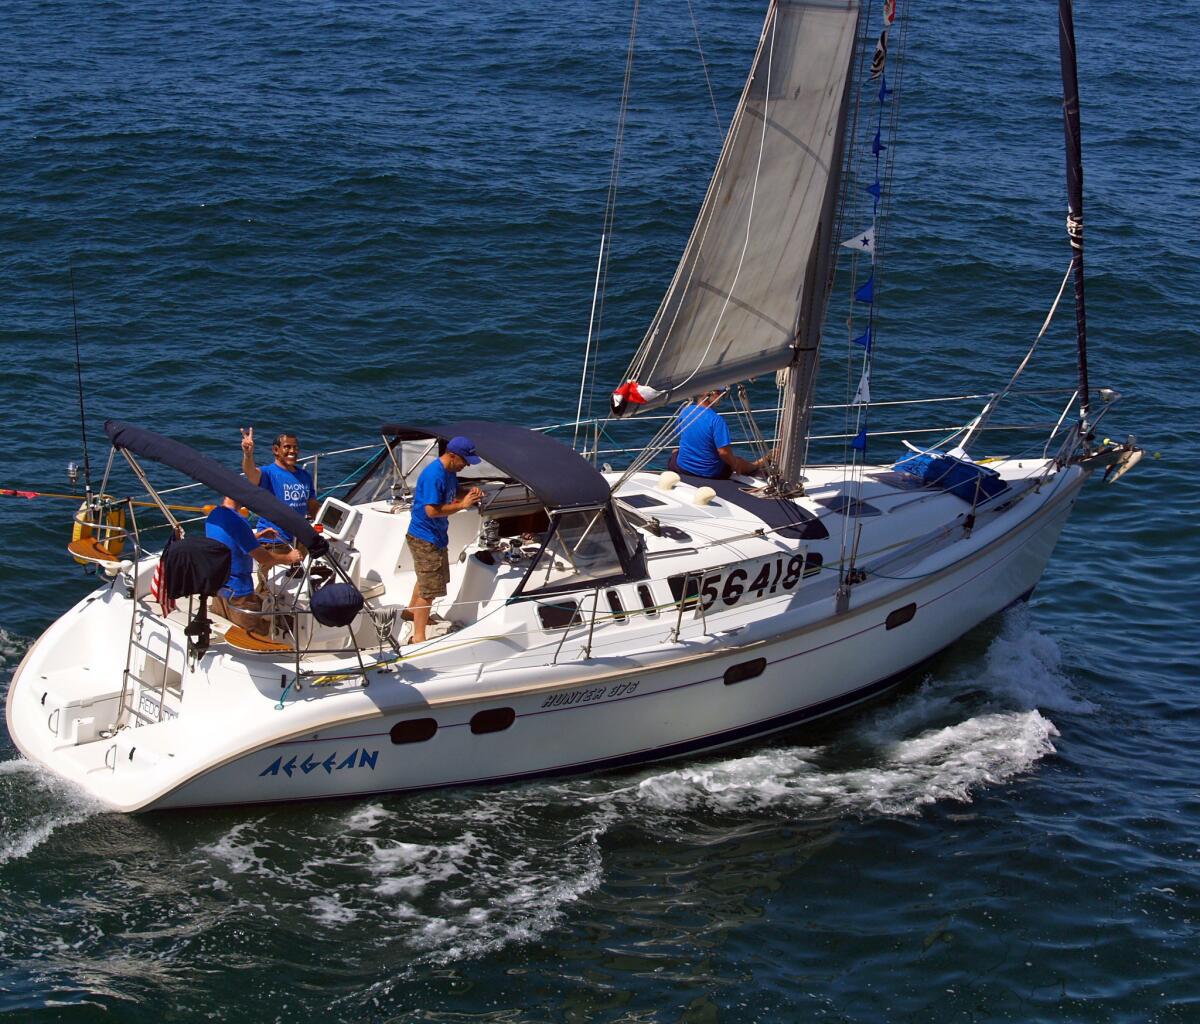 The Aegean with crew members at the start of last year's Newport-Ensenada yacht race.